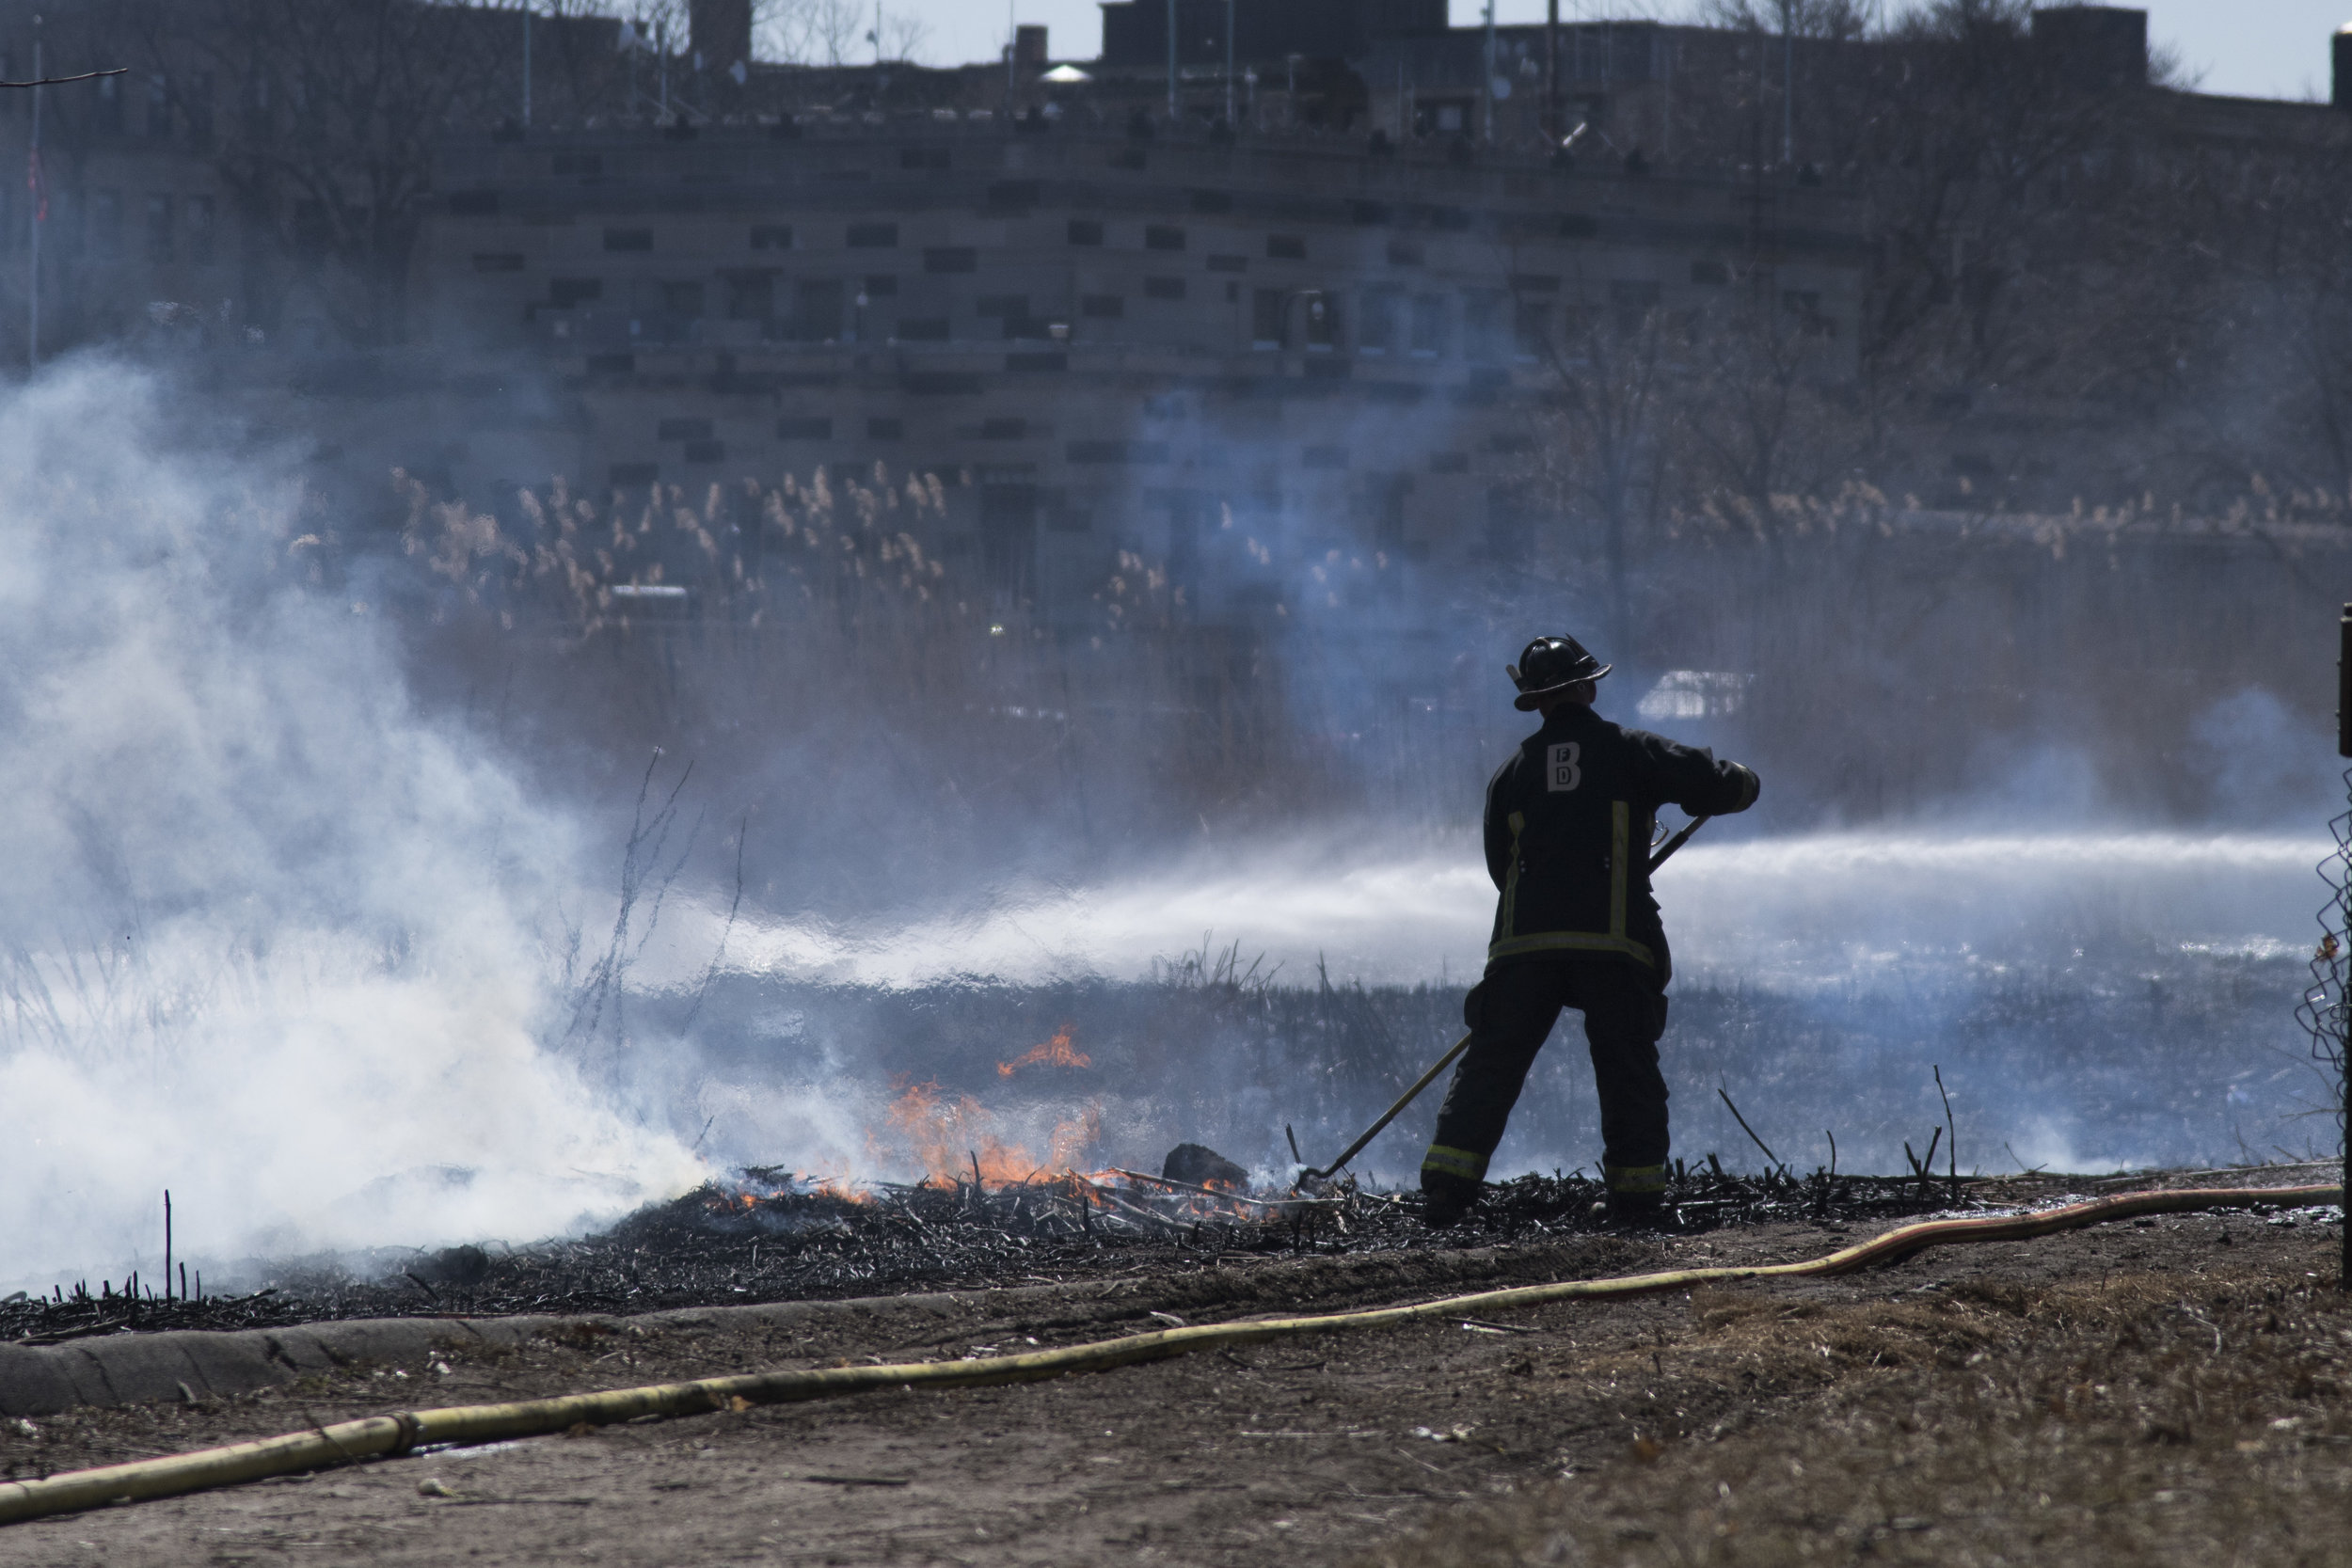  Firefighters put out the last embers of a brush fire in the Back Bay Fens March 28, 2019. Although officials were not sure what exactly started the blaze, the dryness of the park's plant life was a contributing factor. Fires such as these are relati